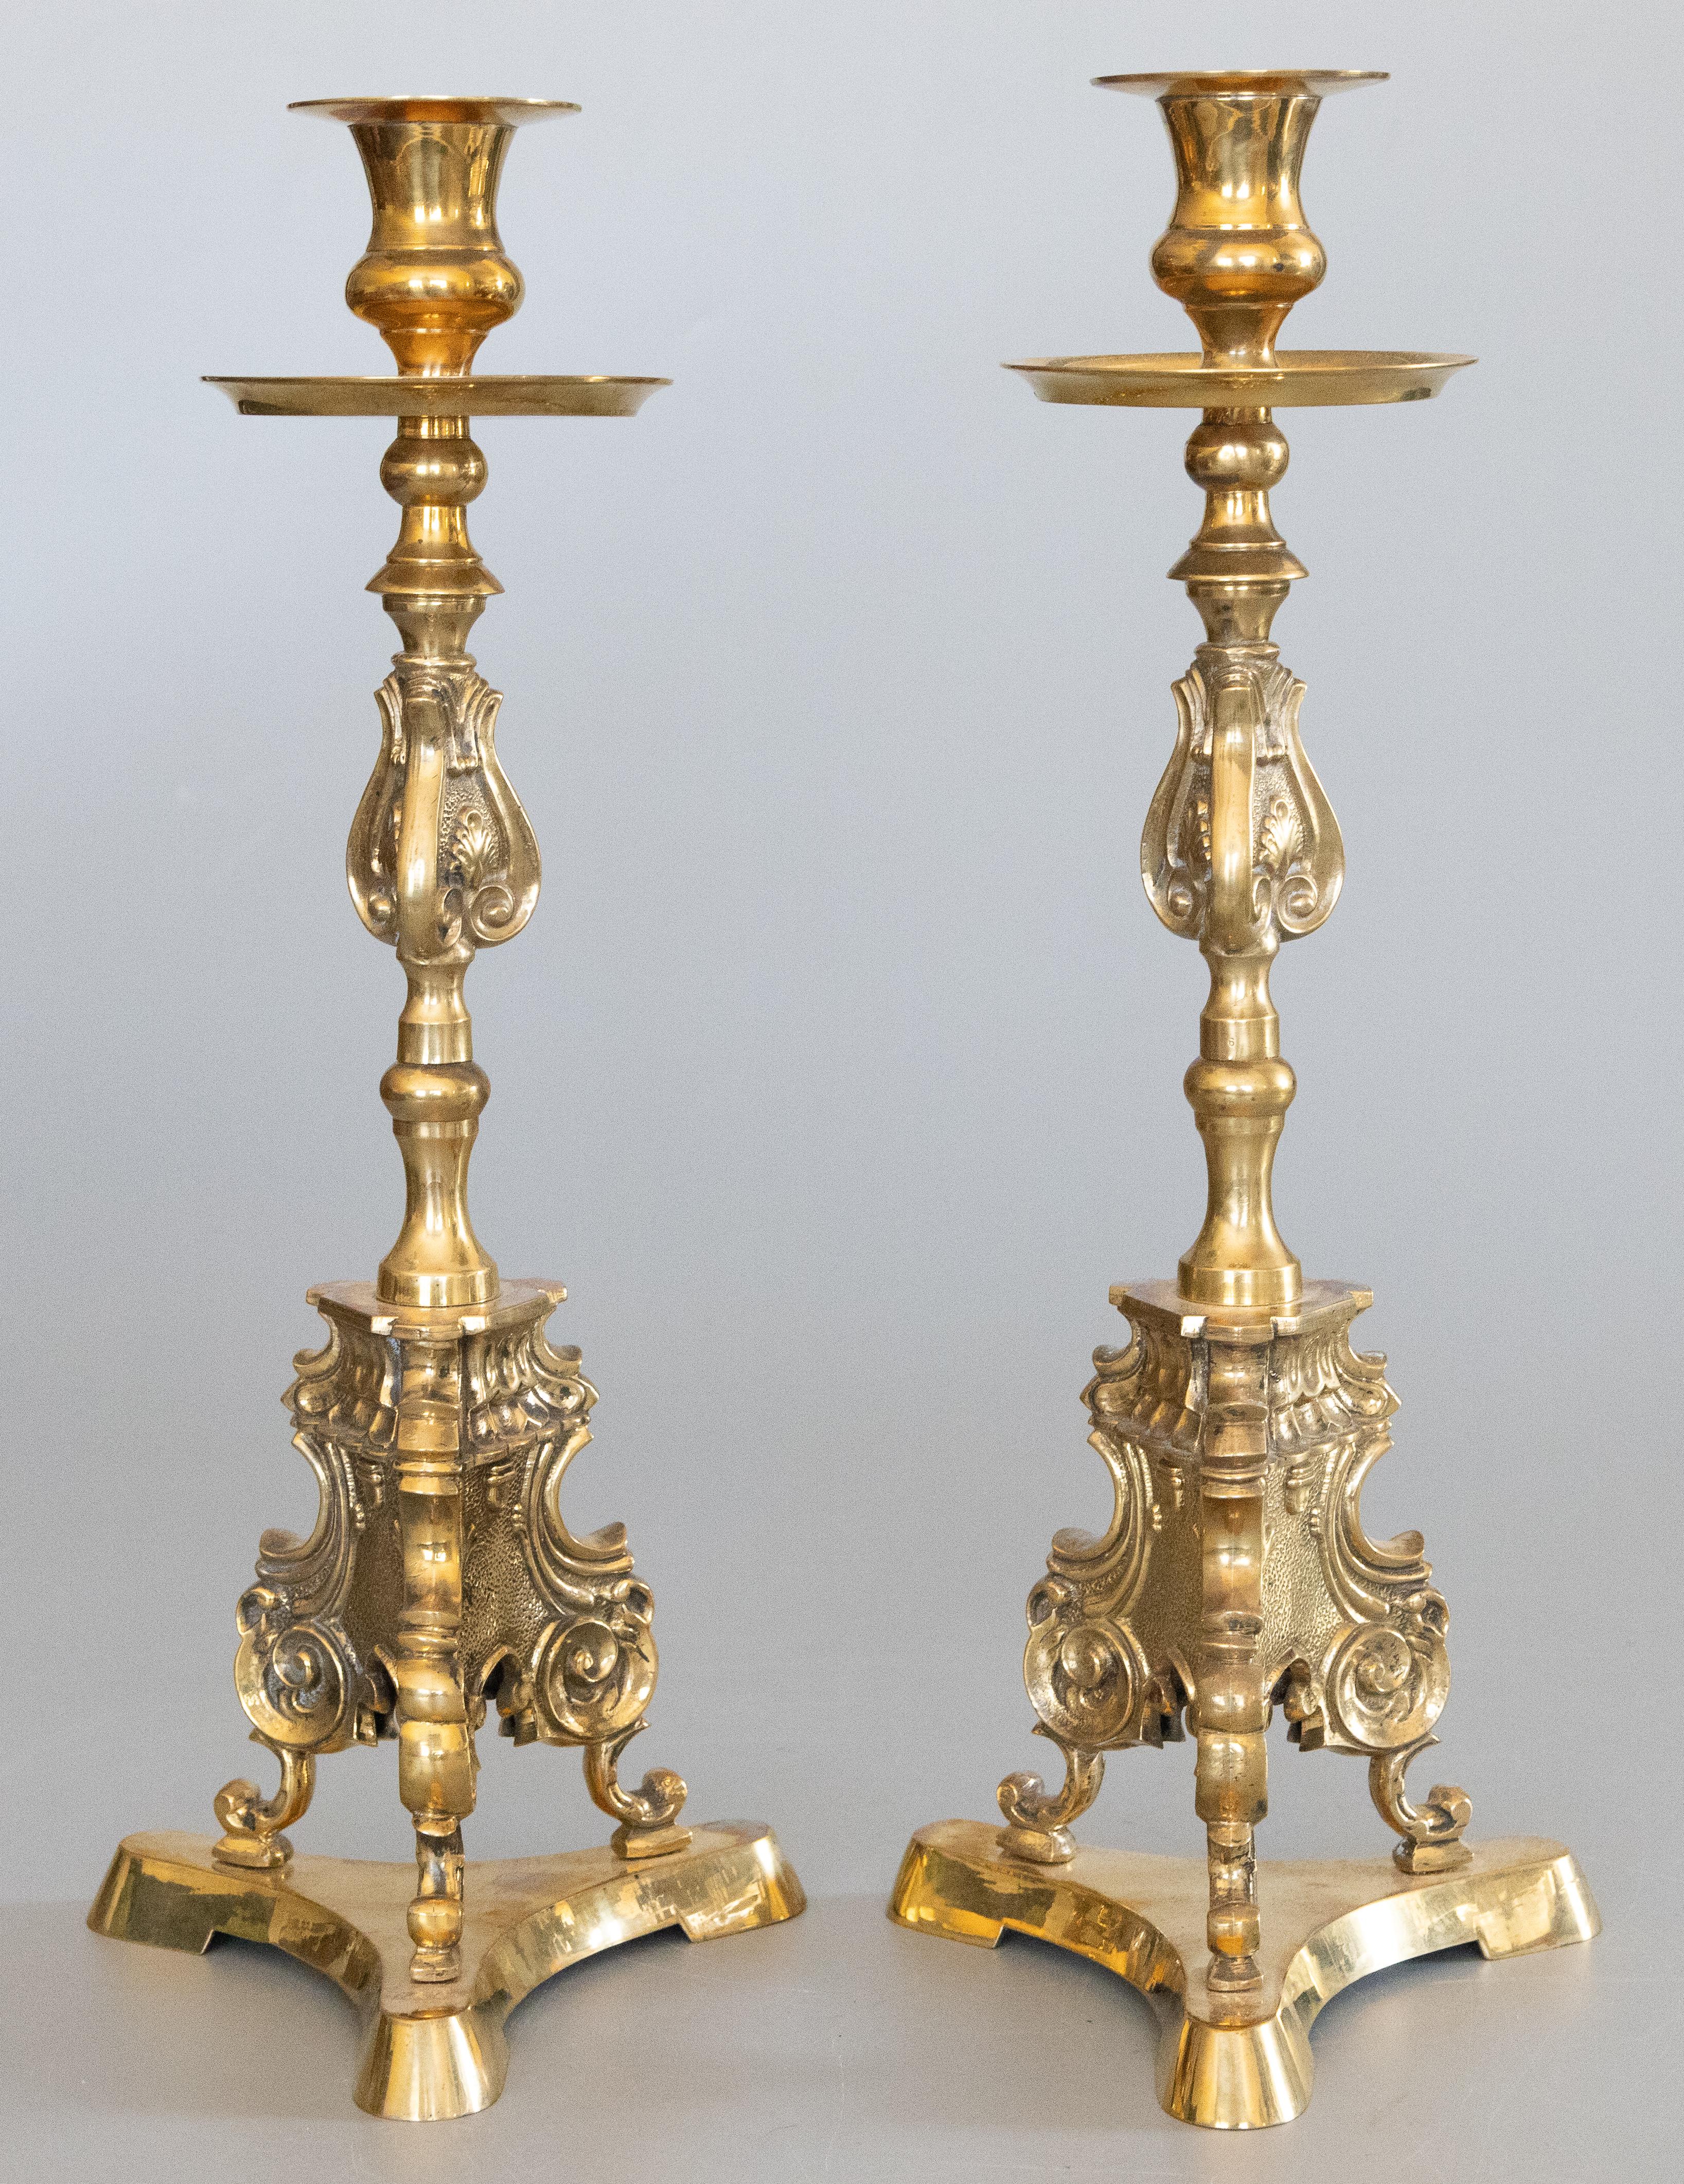 A superb pair of antique French brass altar candlesticks with a triangular base, circa 1920. These fine cathedral candlesticks are decorated with stylized acanthus leave and handsome scrollwork with a lovely brass patina. They display beautifully,